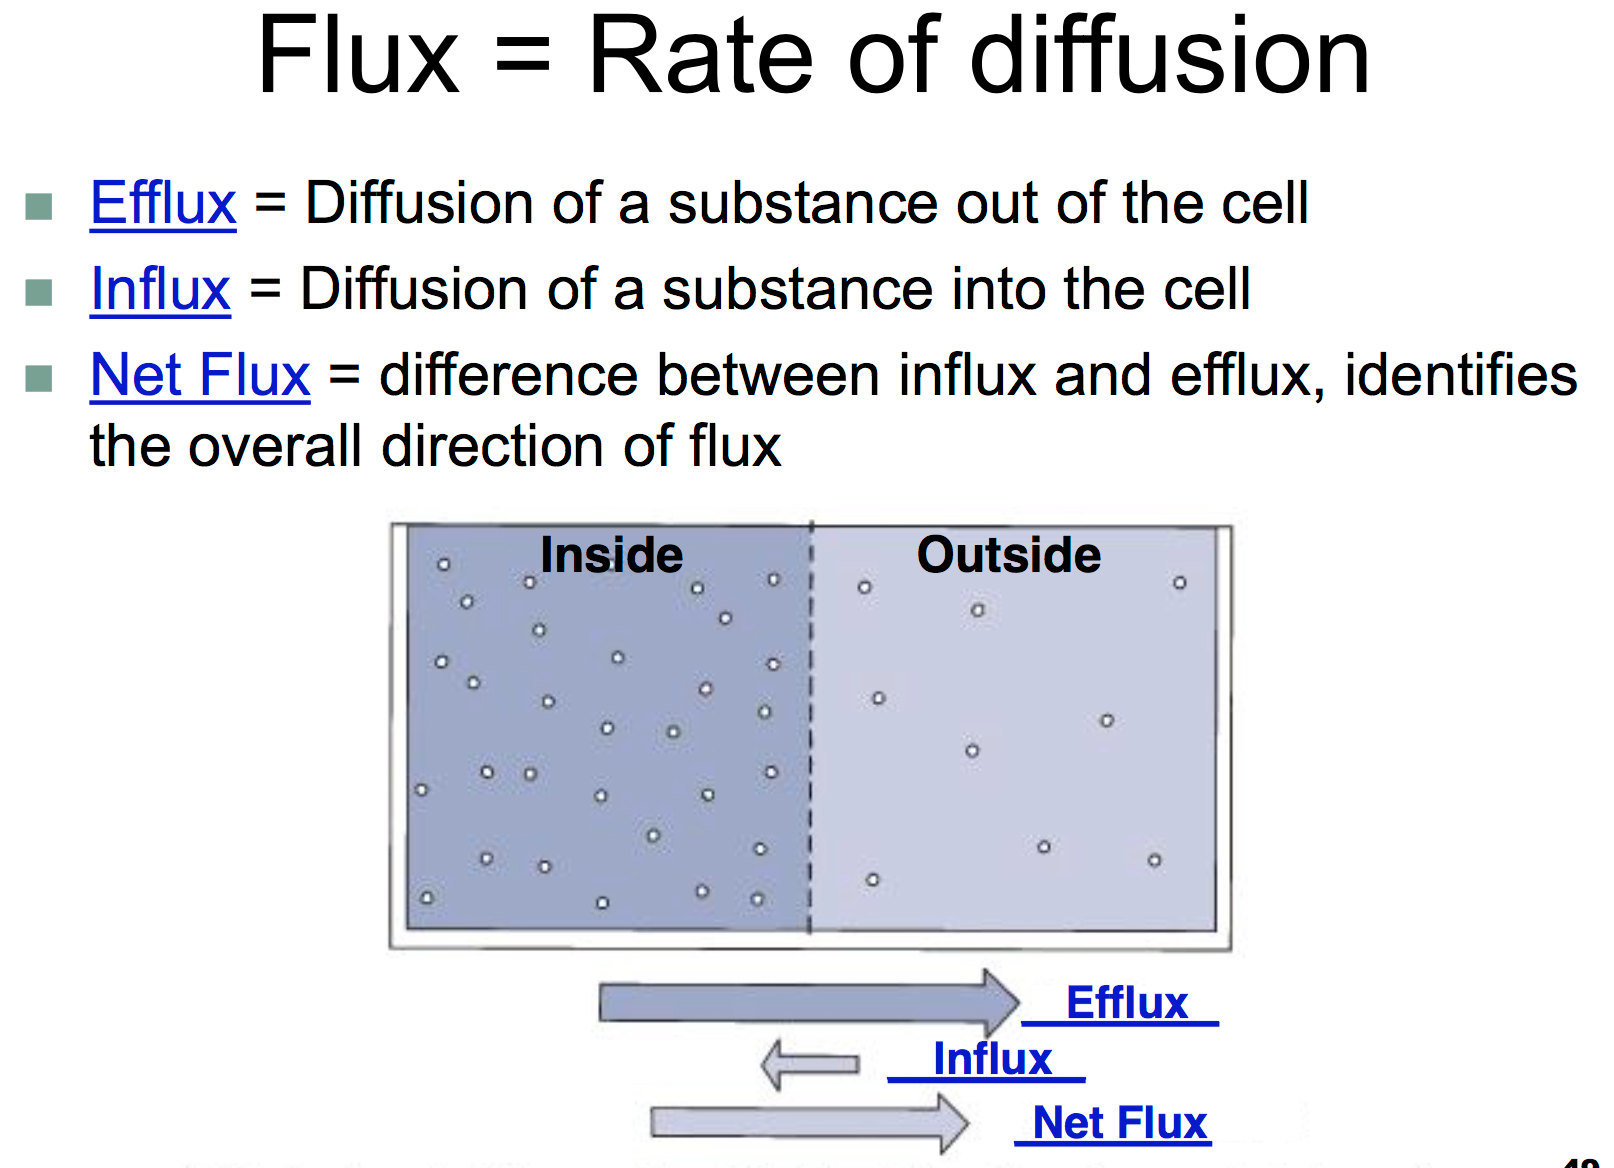 Influx and efflux of ions